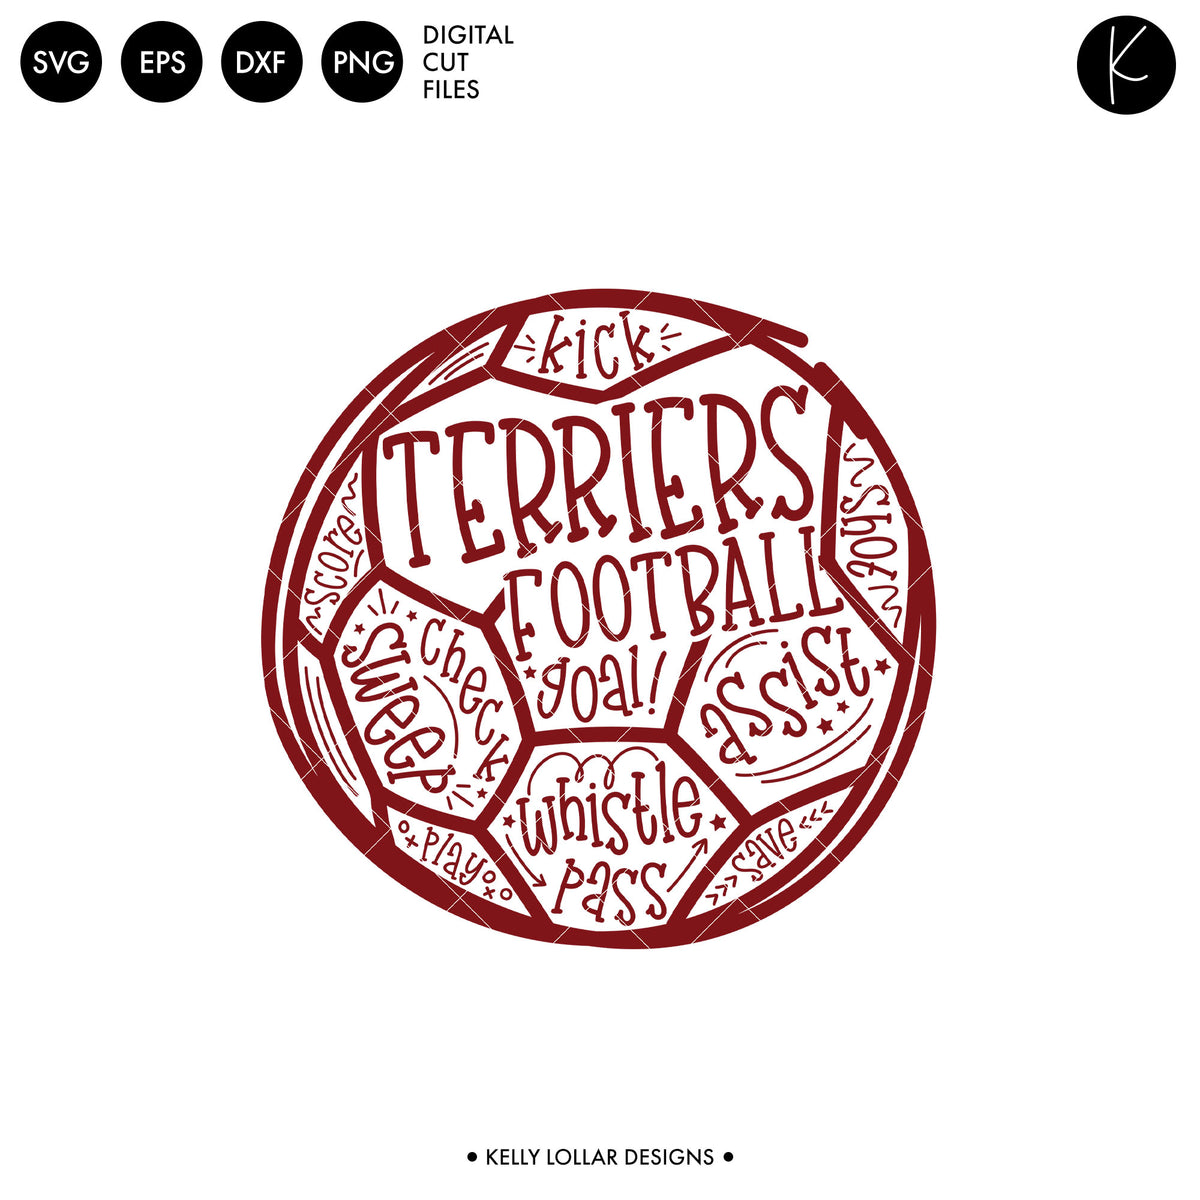 Terriers Soccer and Football Bundle | SVG DXF EPS PNG Cut Files